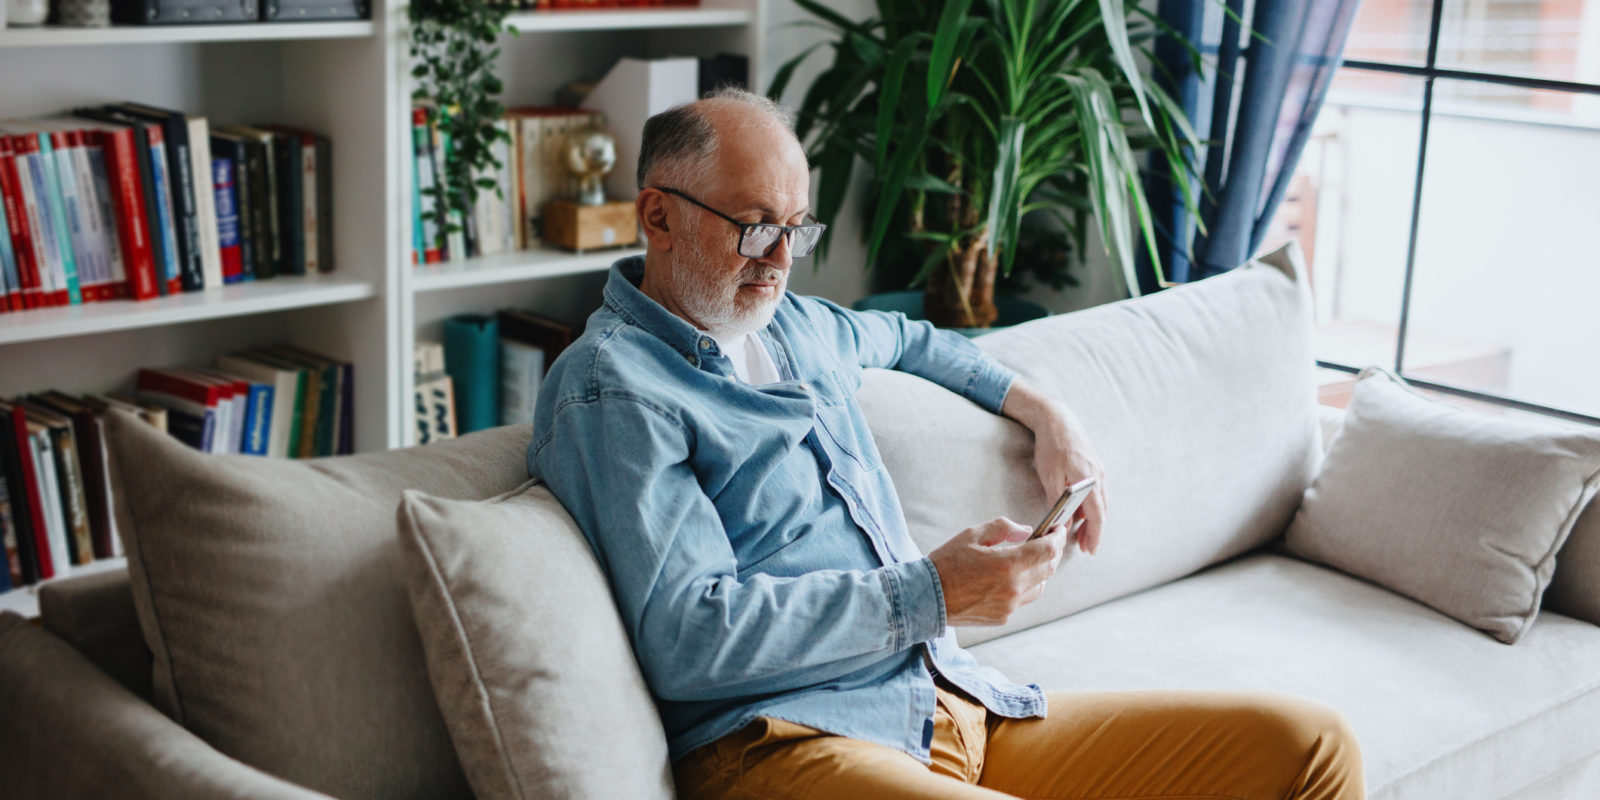 man in a blue shirt and glasses sits on a beige couch in front of a bookshelf and uses his smartphone